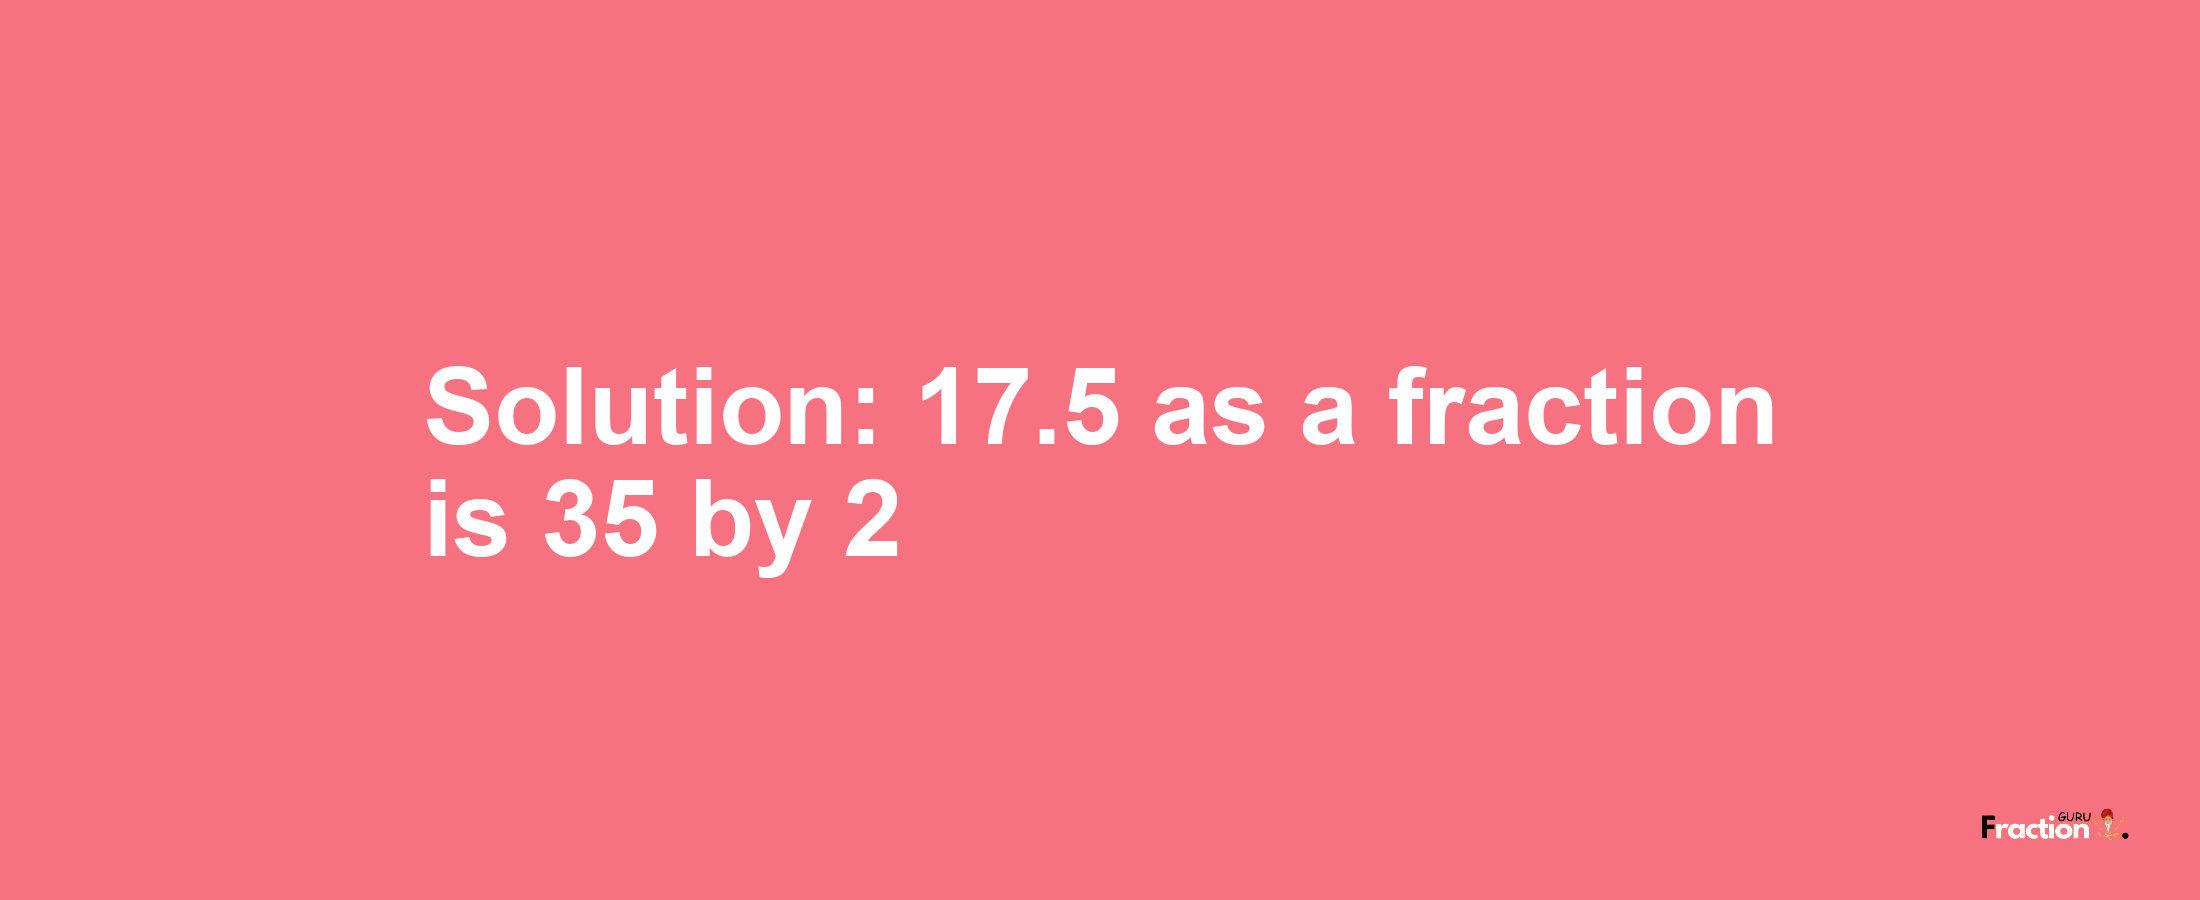 Solution:17.5 as a fraction is 35/2